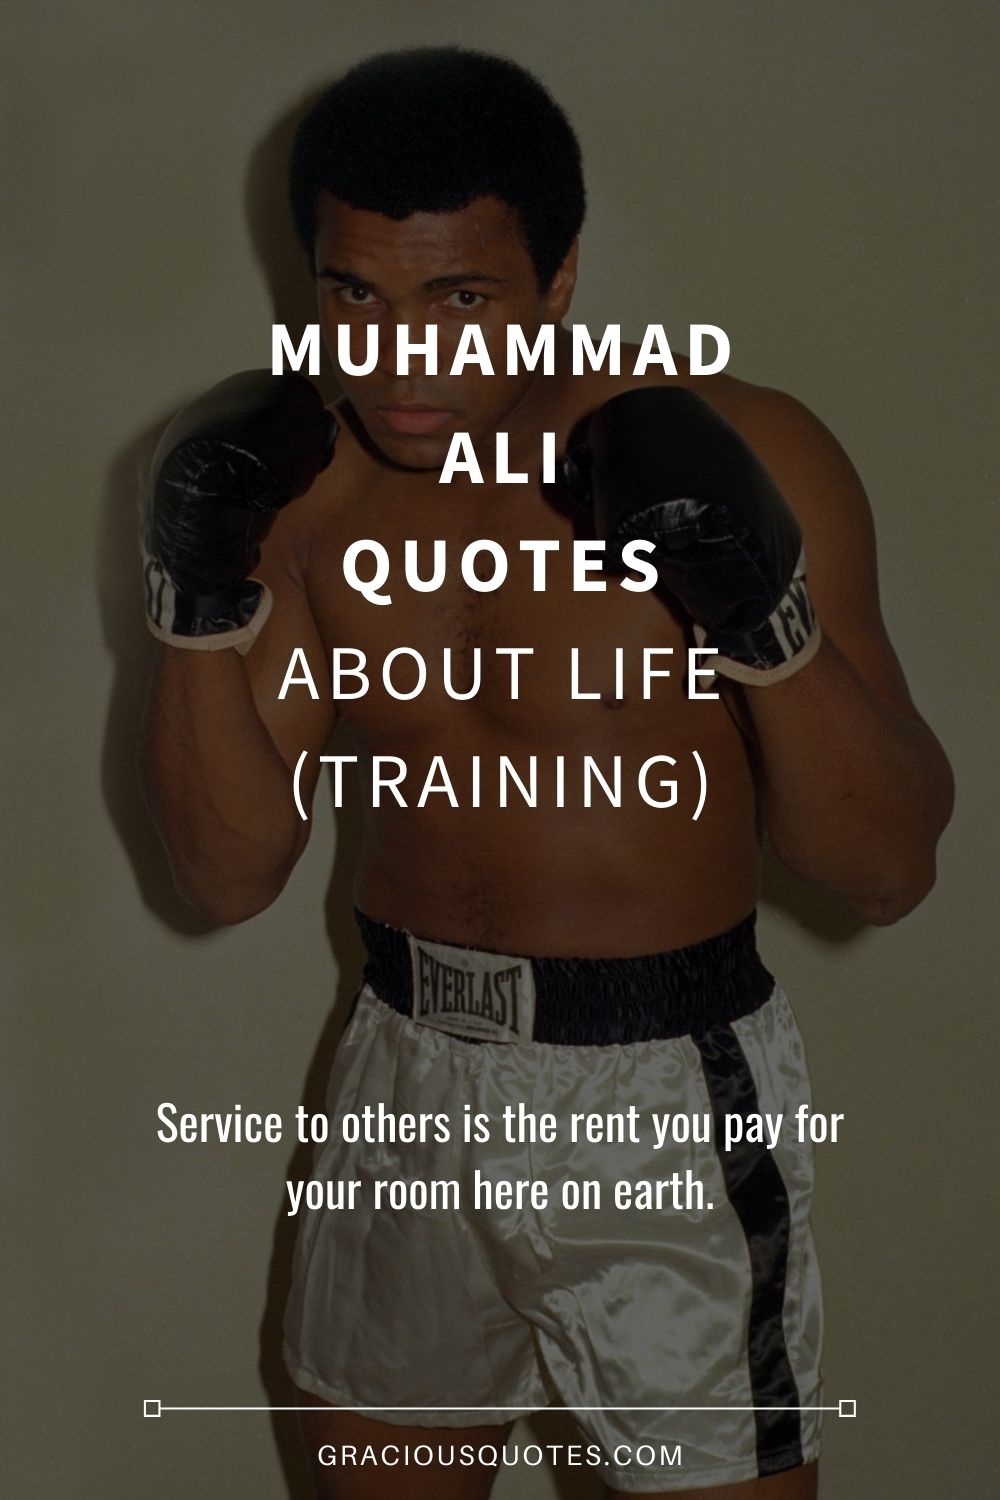 82 Muhammad Ali Quotes About Life (TRAINING)